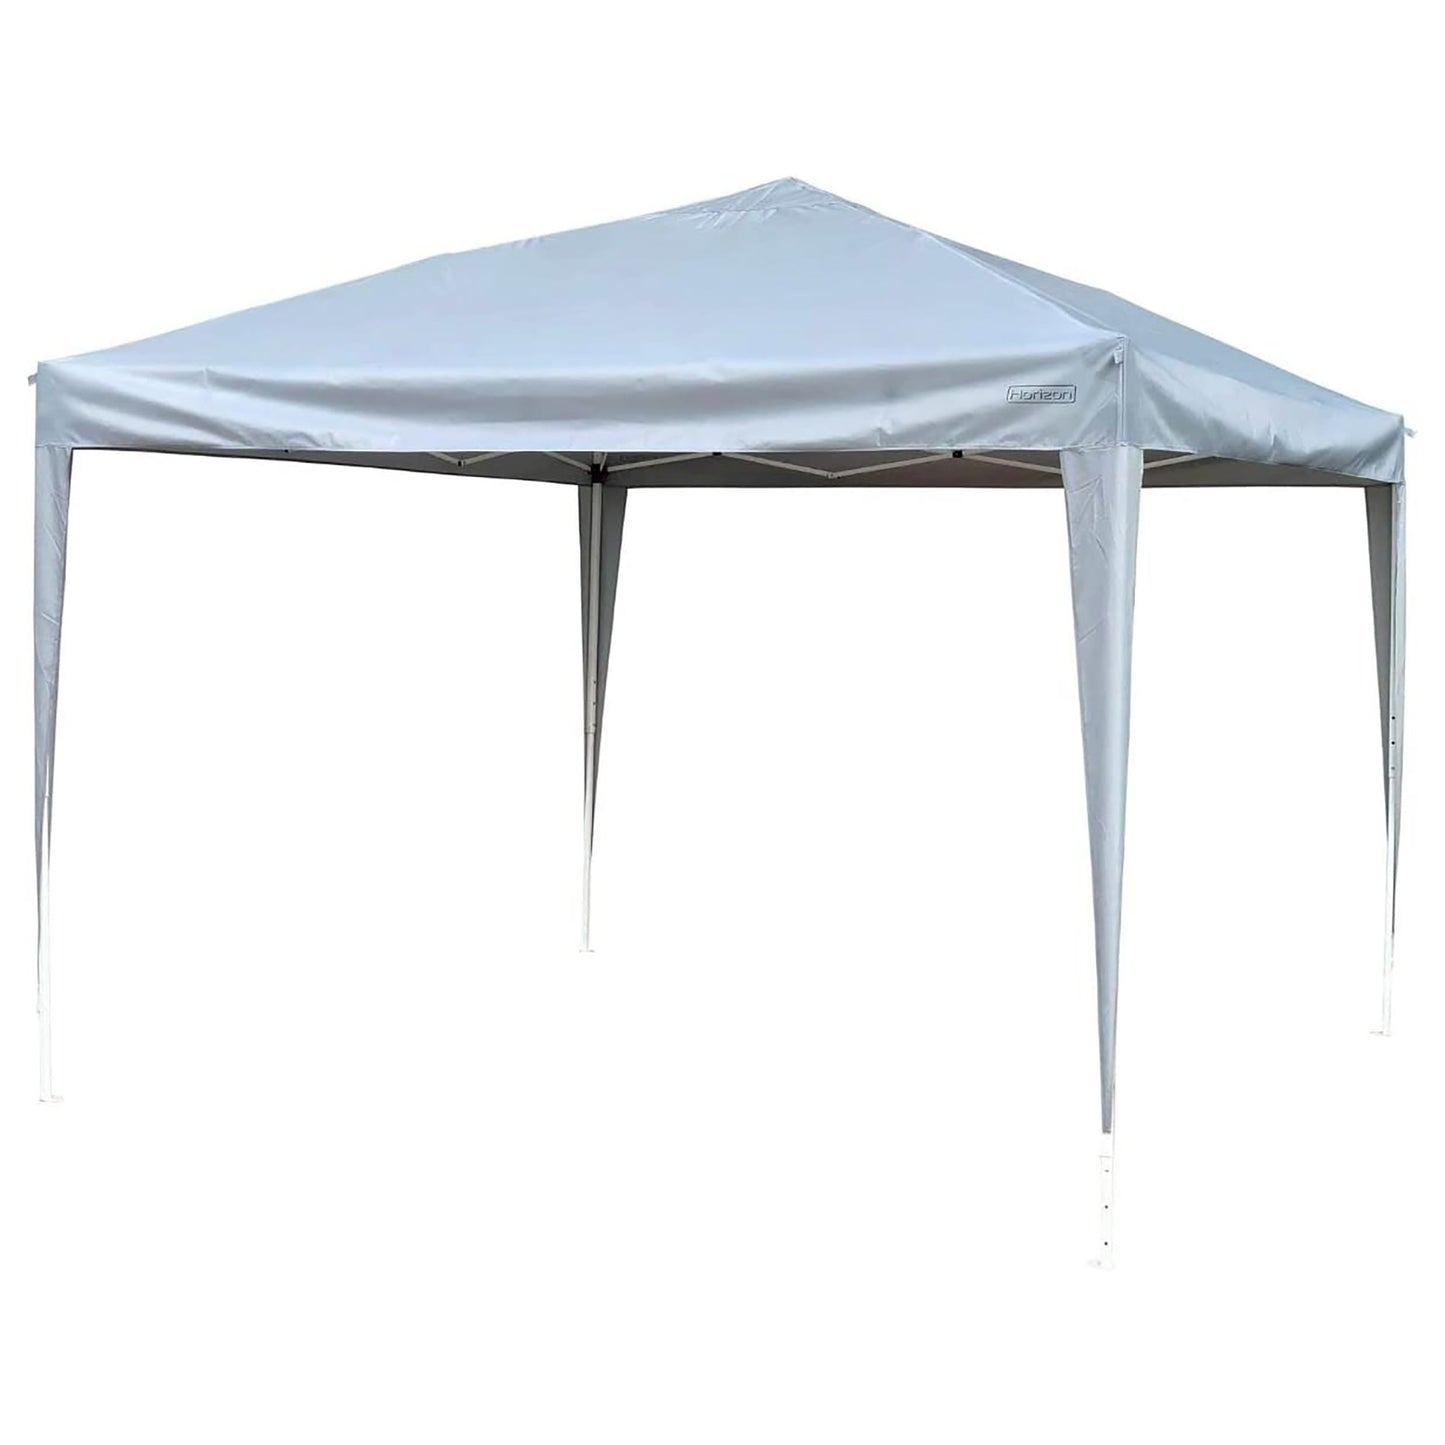 Waterproof Pop Up Gazebo with Sides 3m x 3m Pop Up Outdoor Garden PVC Coated - Travel Bag & 4 Leg Weight Bags Grey or Beige